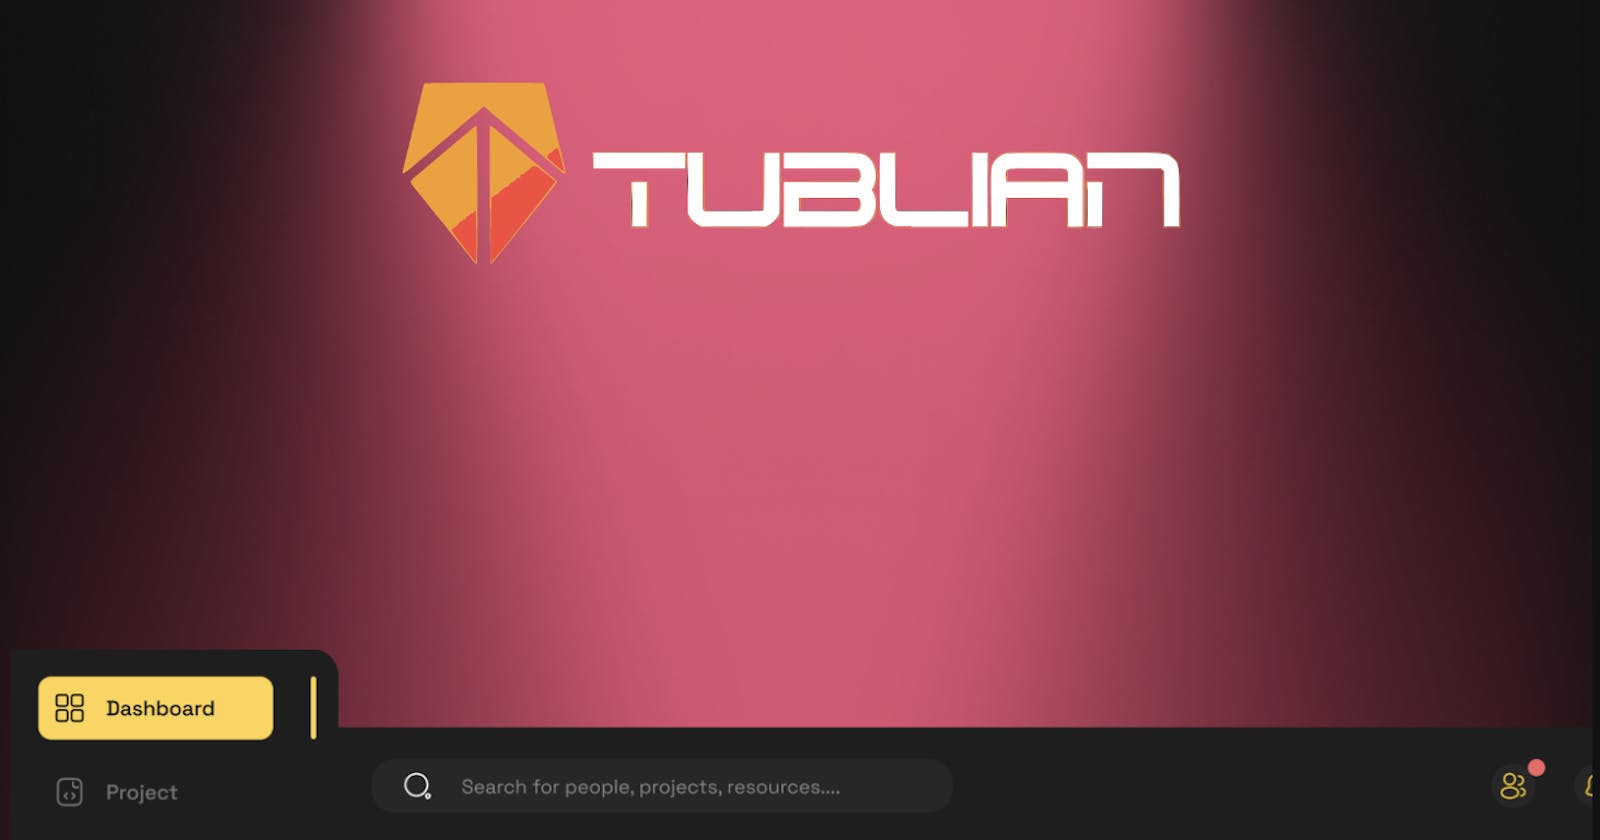 Introducing the new Tublian Developer Dashboard.